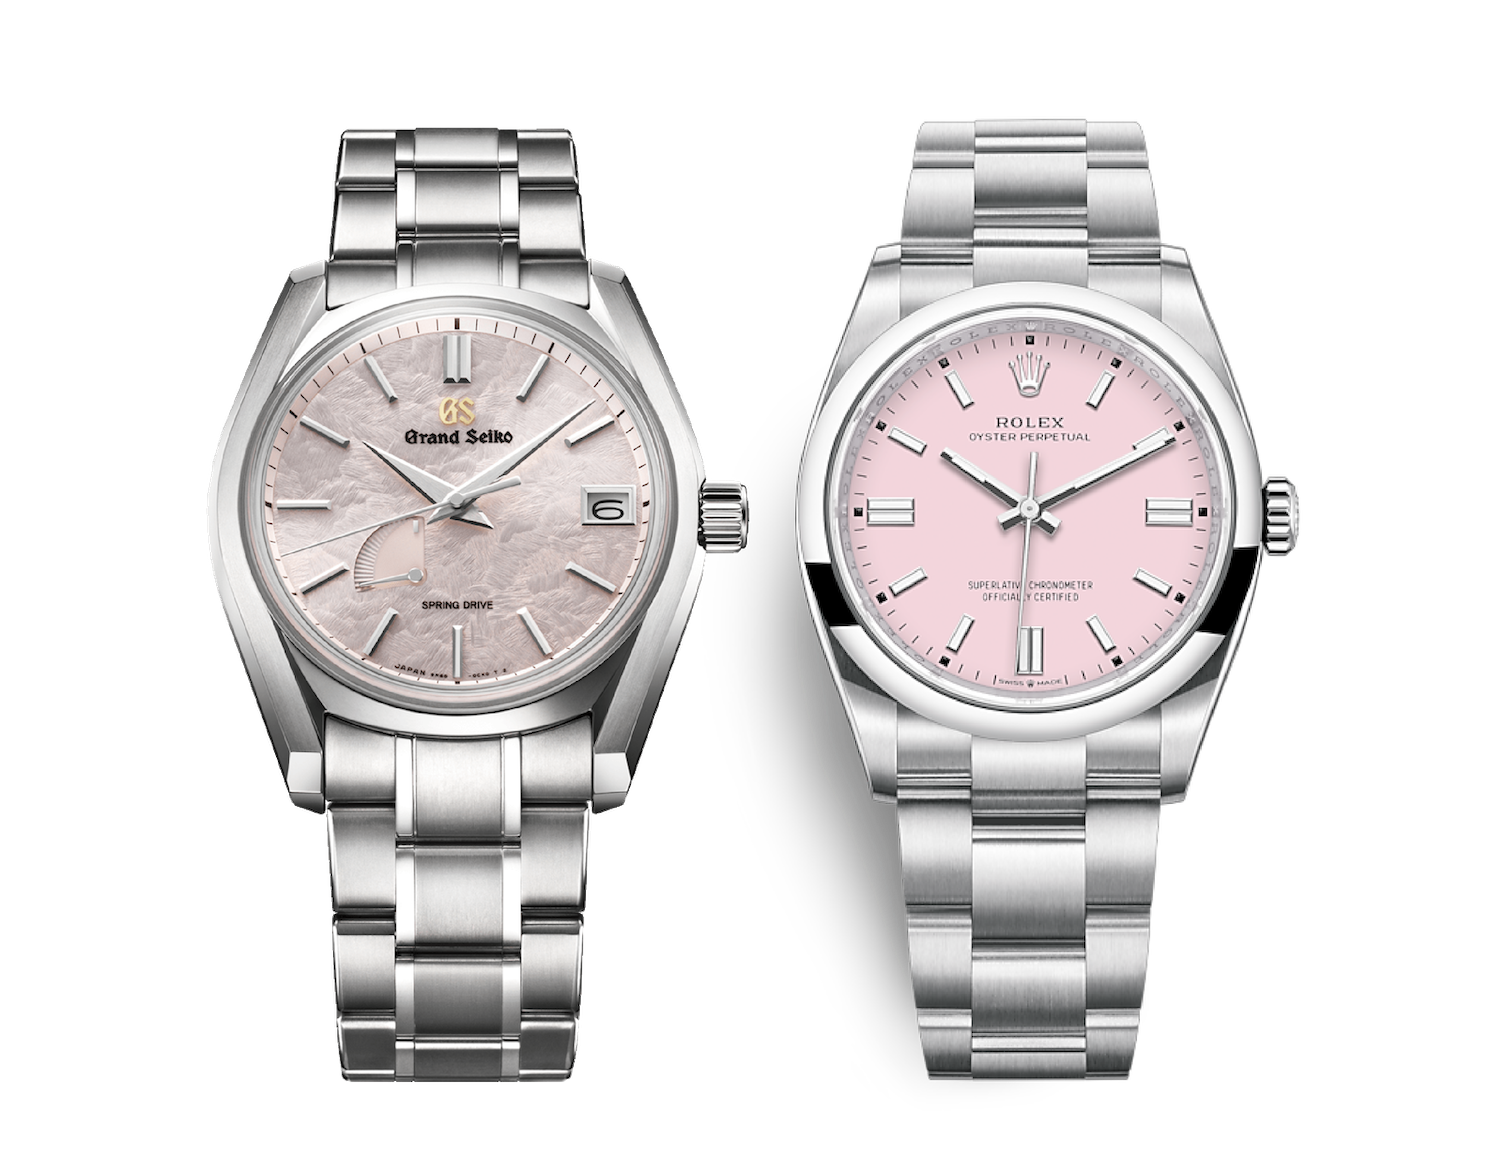 IN-DEPTH: The ‘other’ pink watch: Why I bought the Grand Seiko SBGA413 instead of waiting for the pink Rolex OP 36